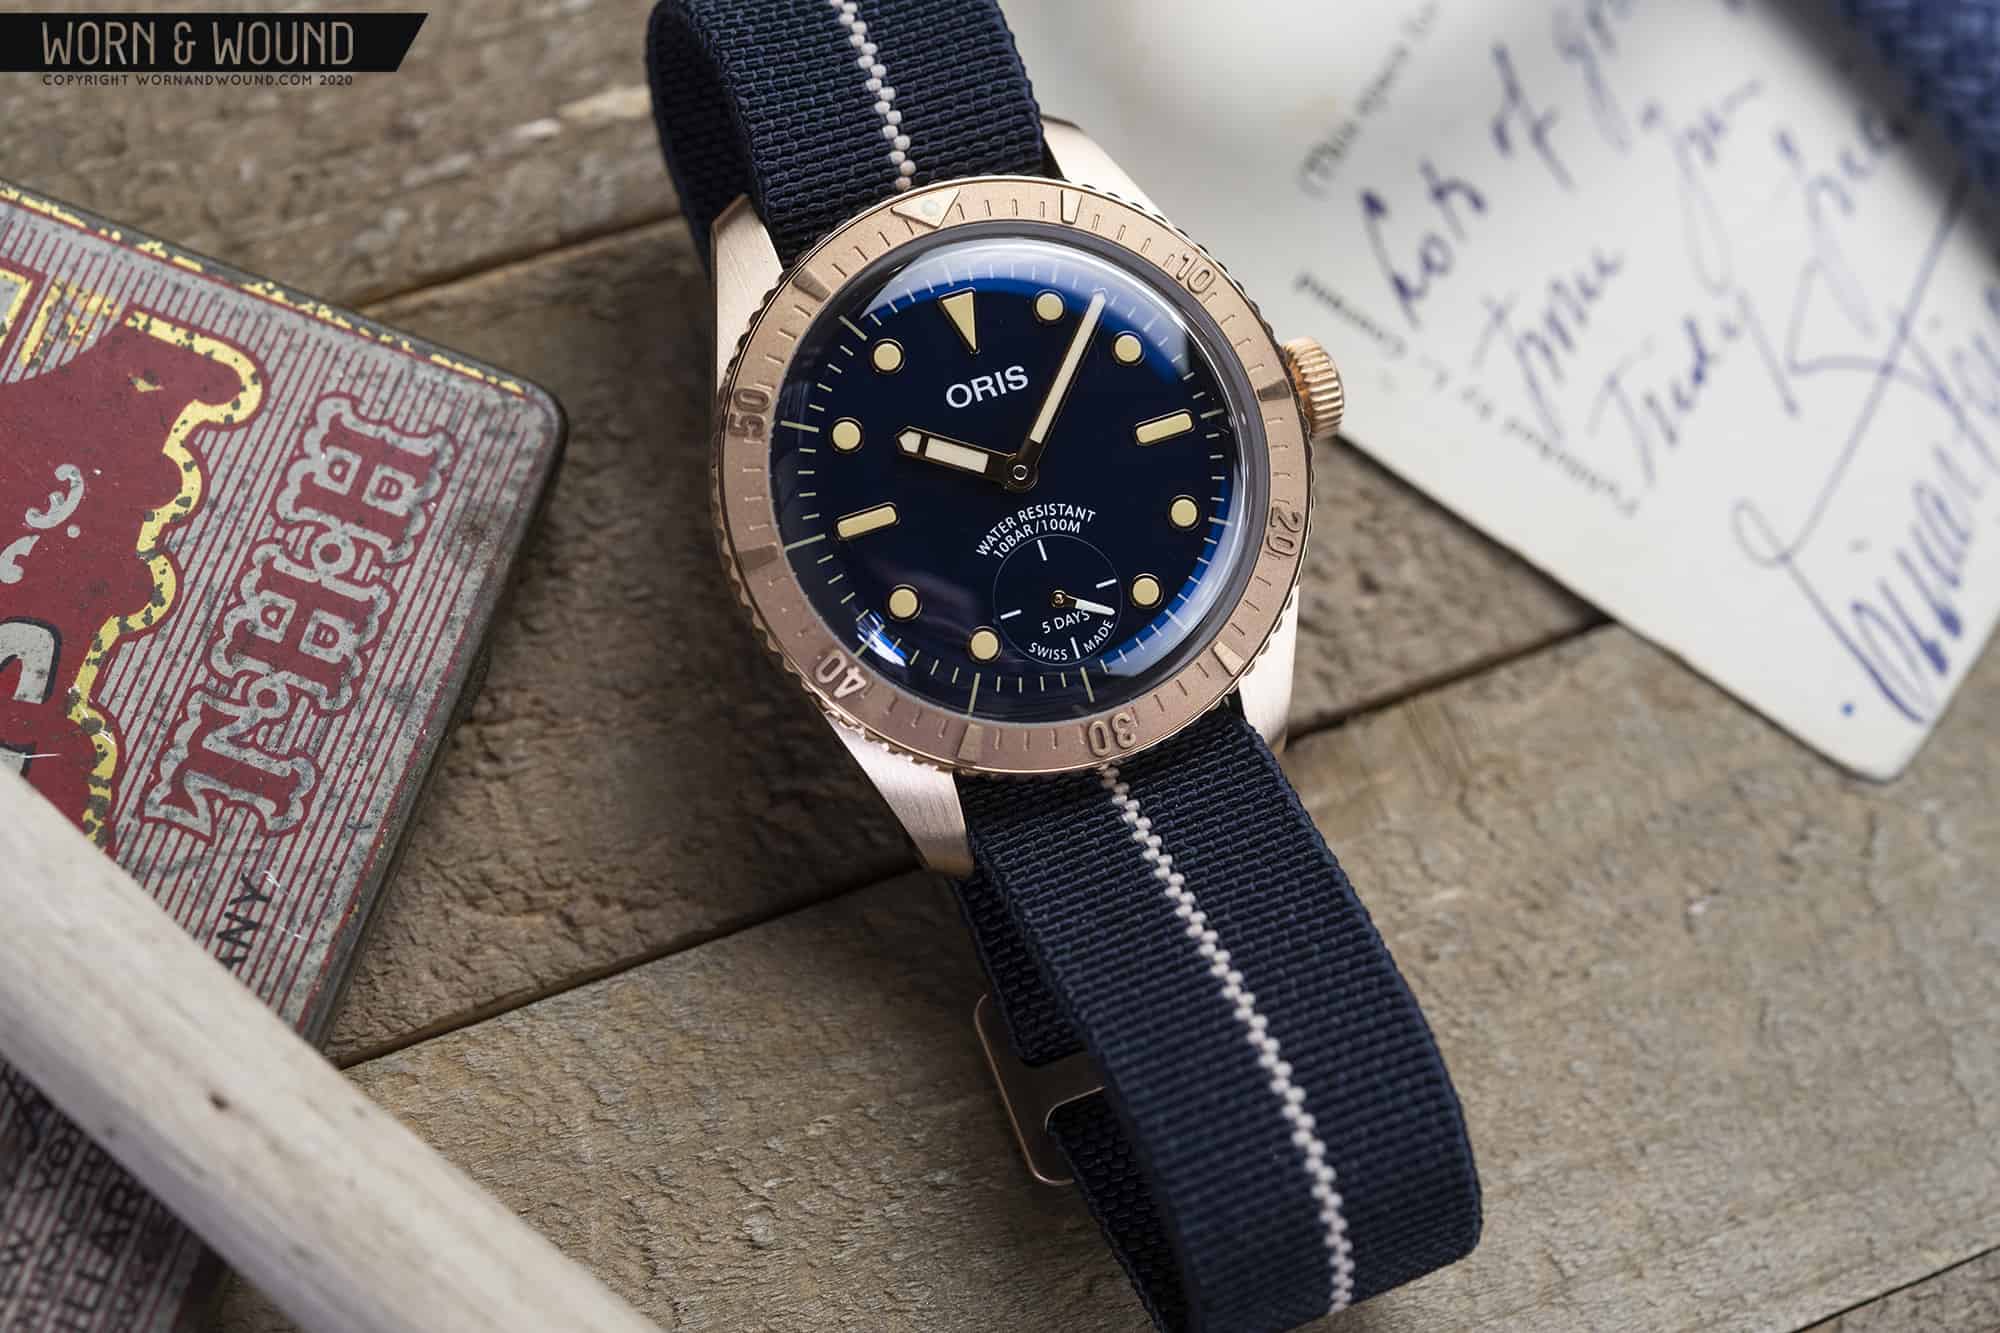 Oris Introduces their Latest Carl Brashear Limited Edition, Featuring the New Caliber 401 Movement